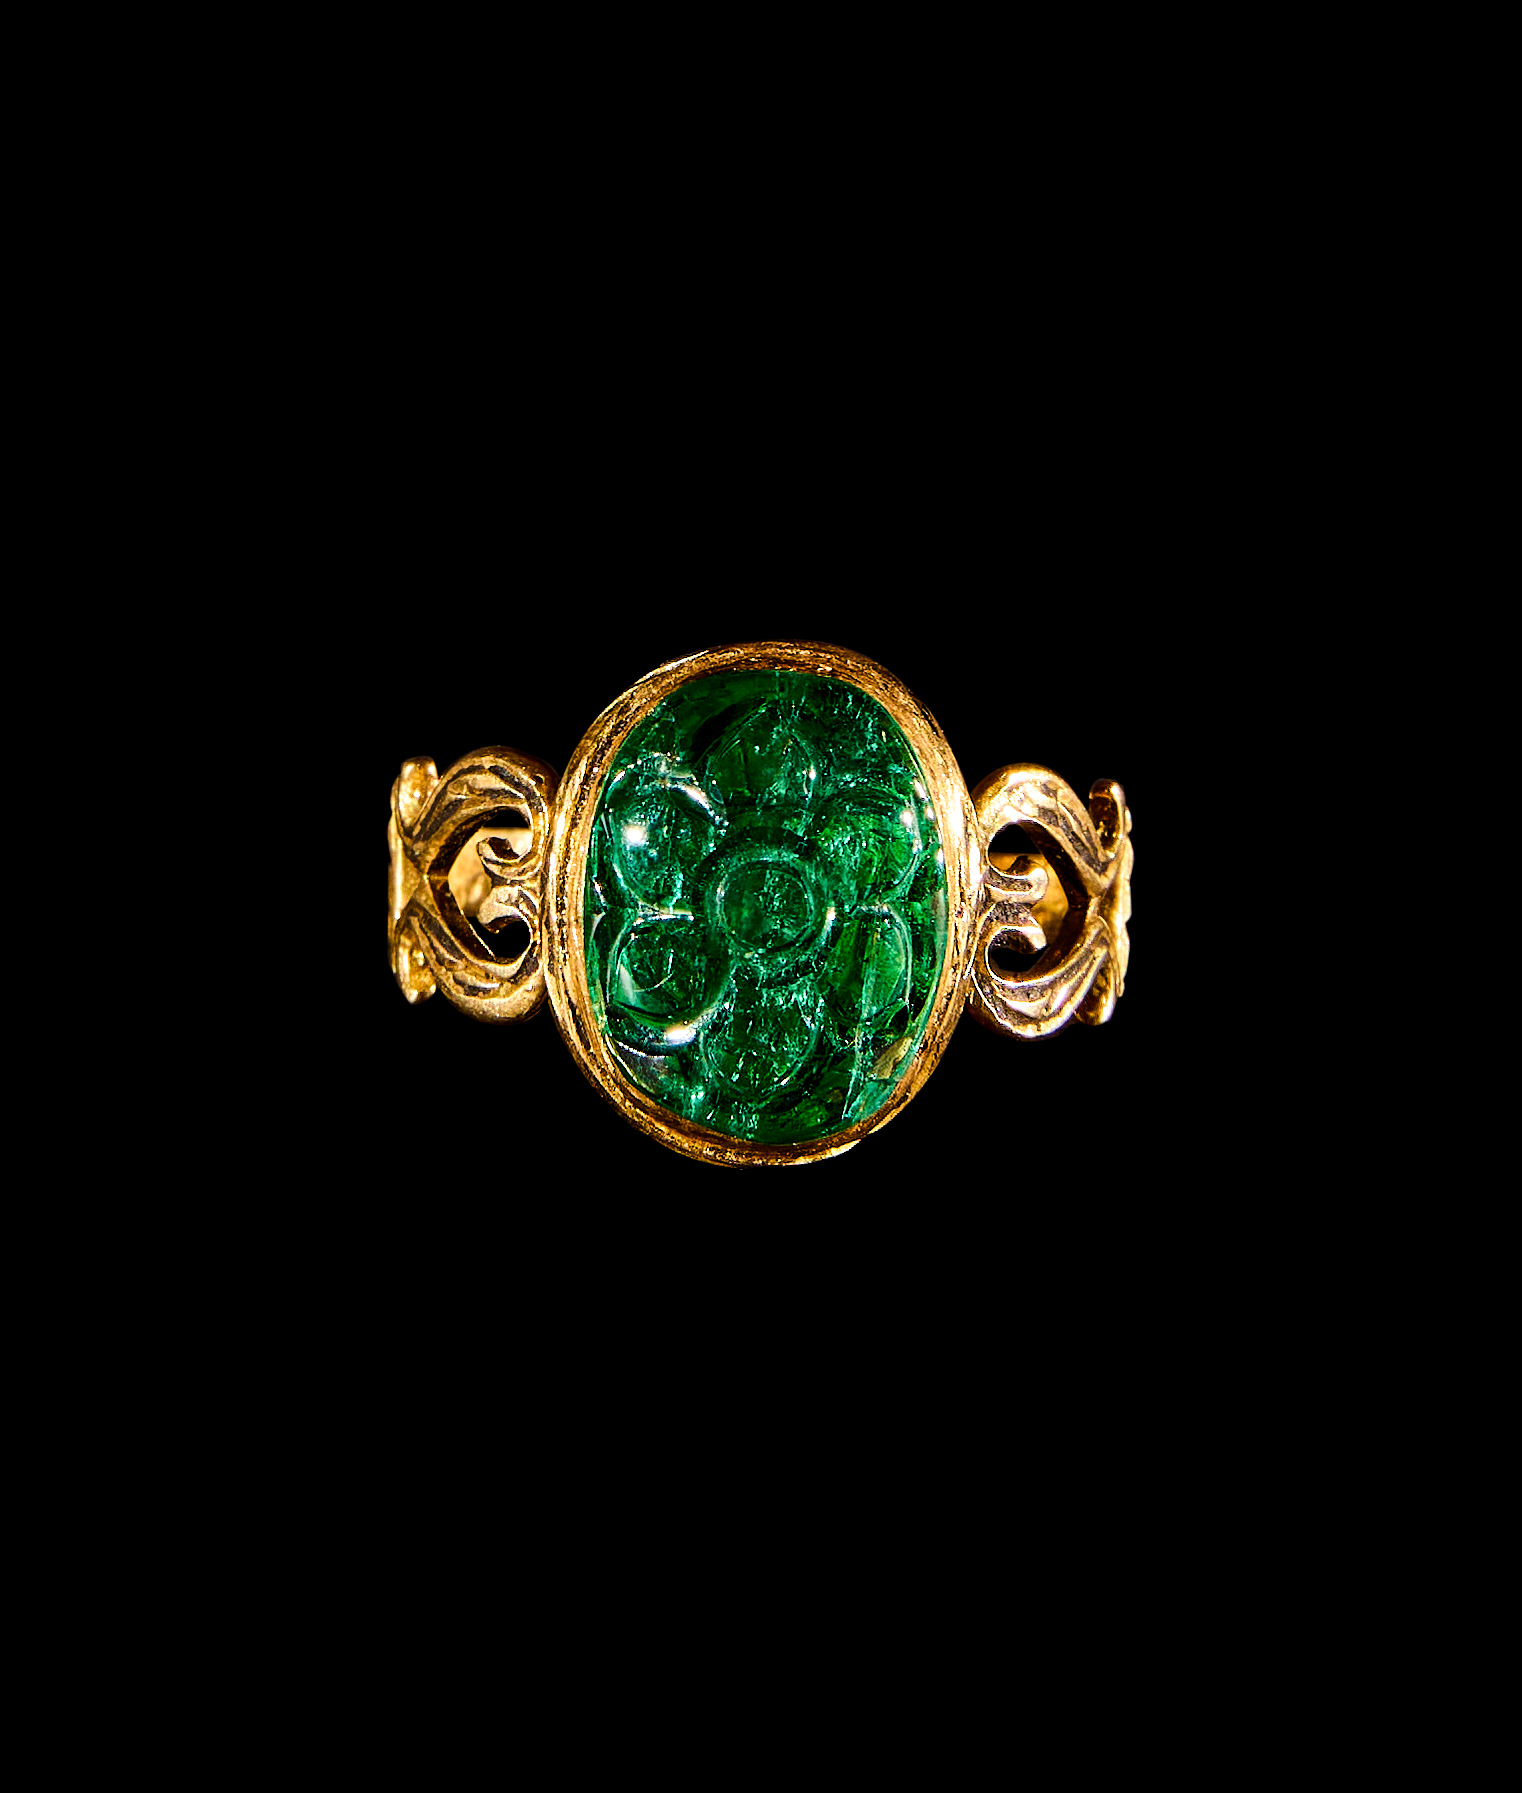 AN ENGRAVED MUGHAL EMERALD & GOLD RING, MUGHAL 19TH CENTURY, INDIA